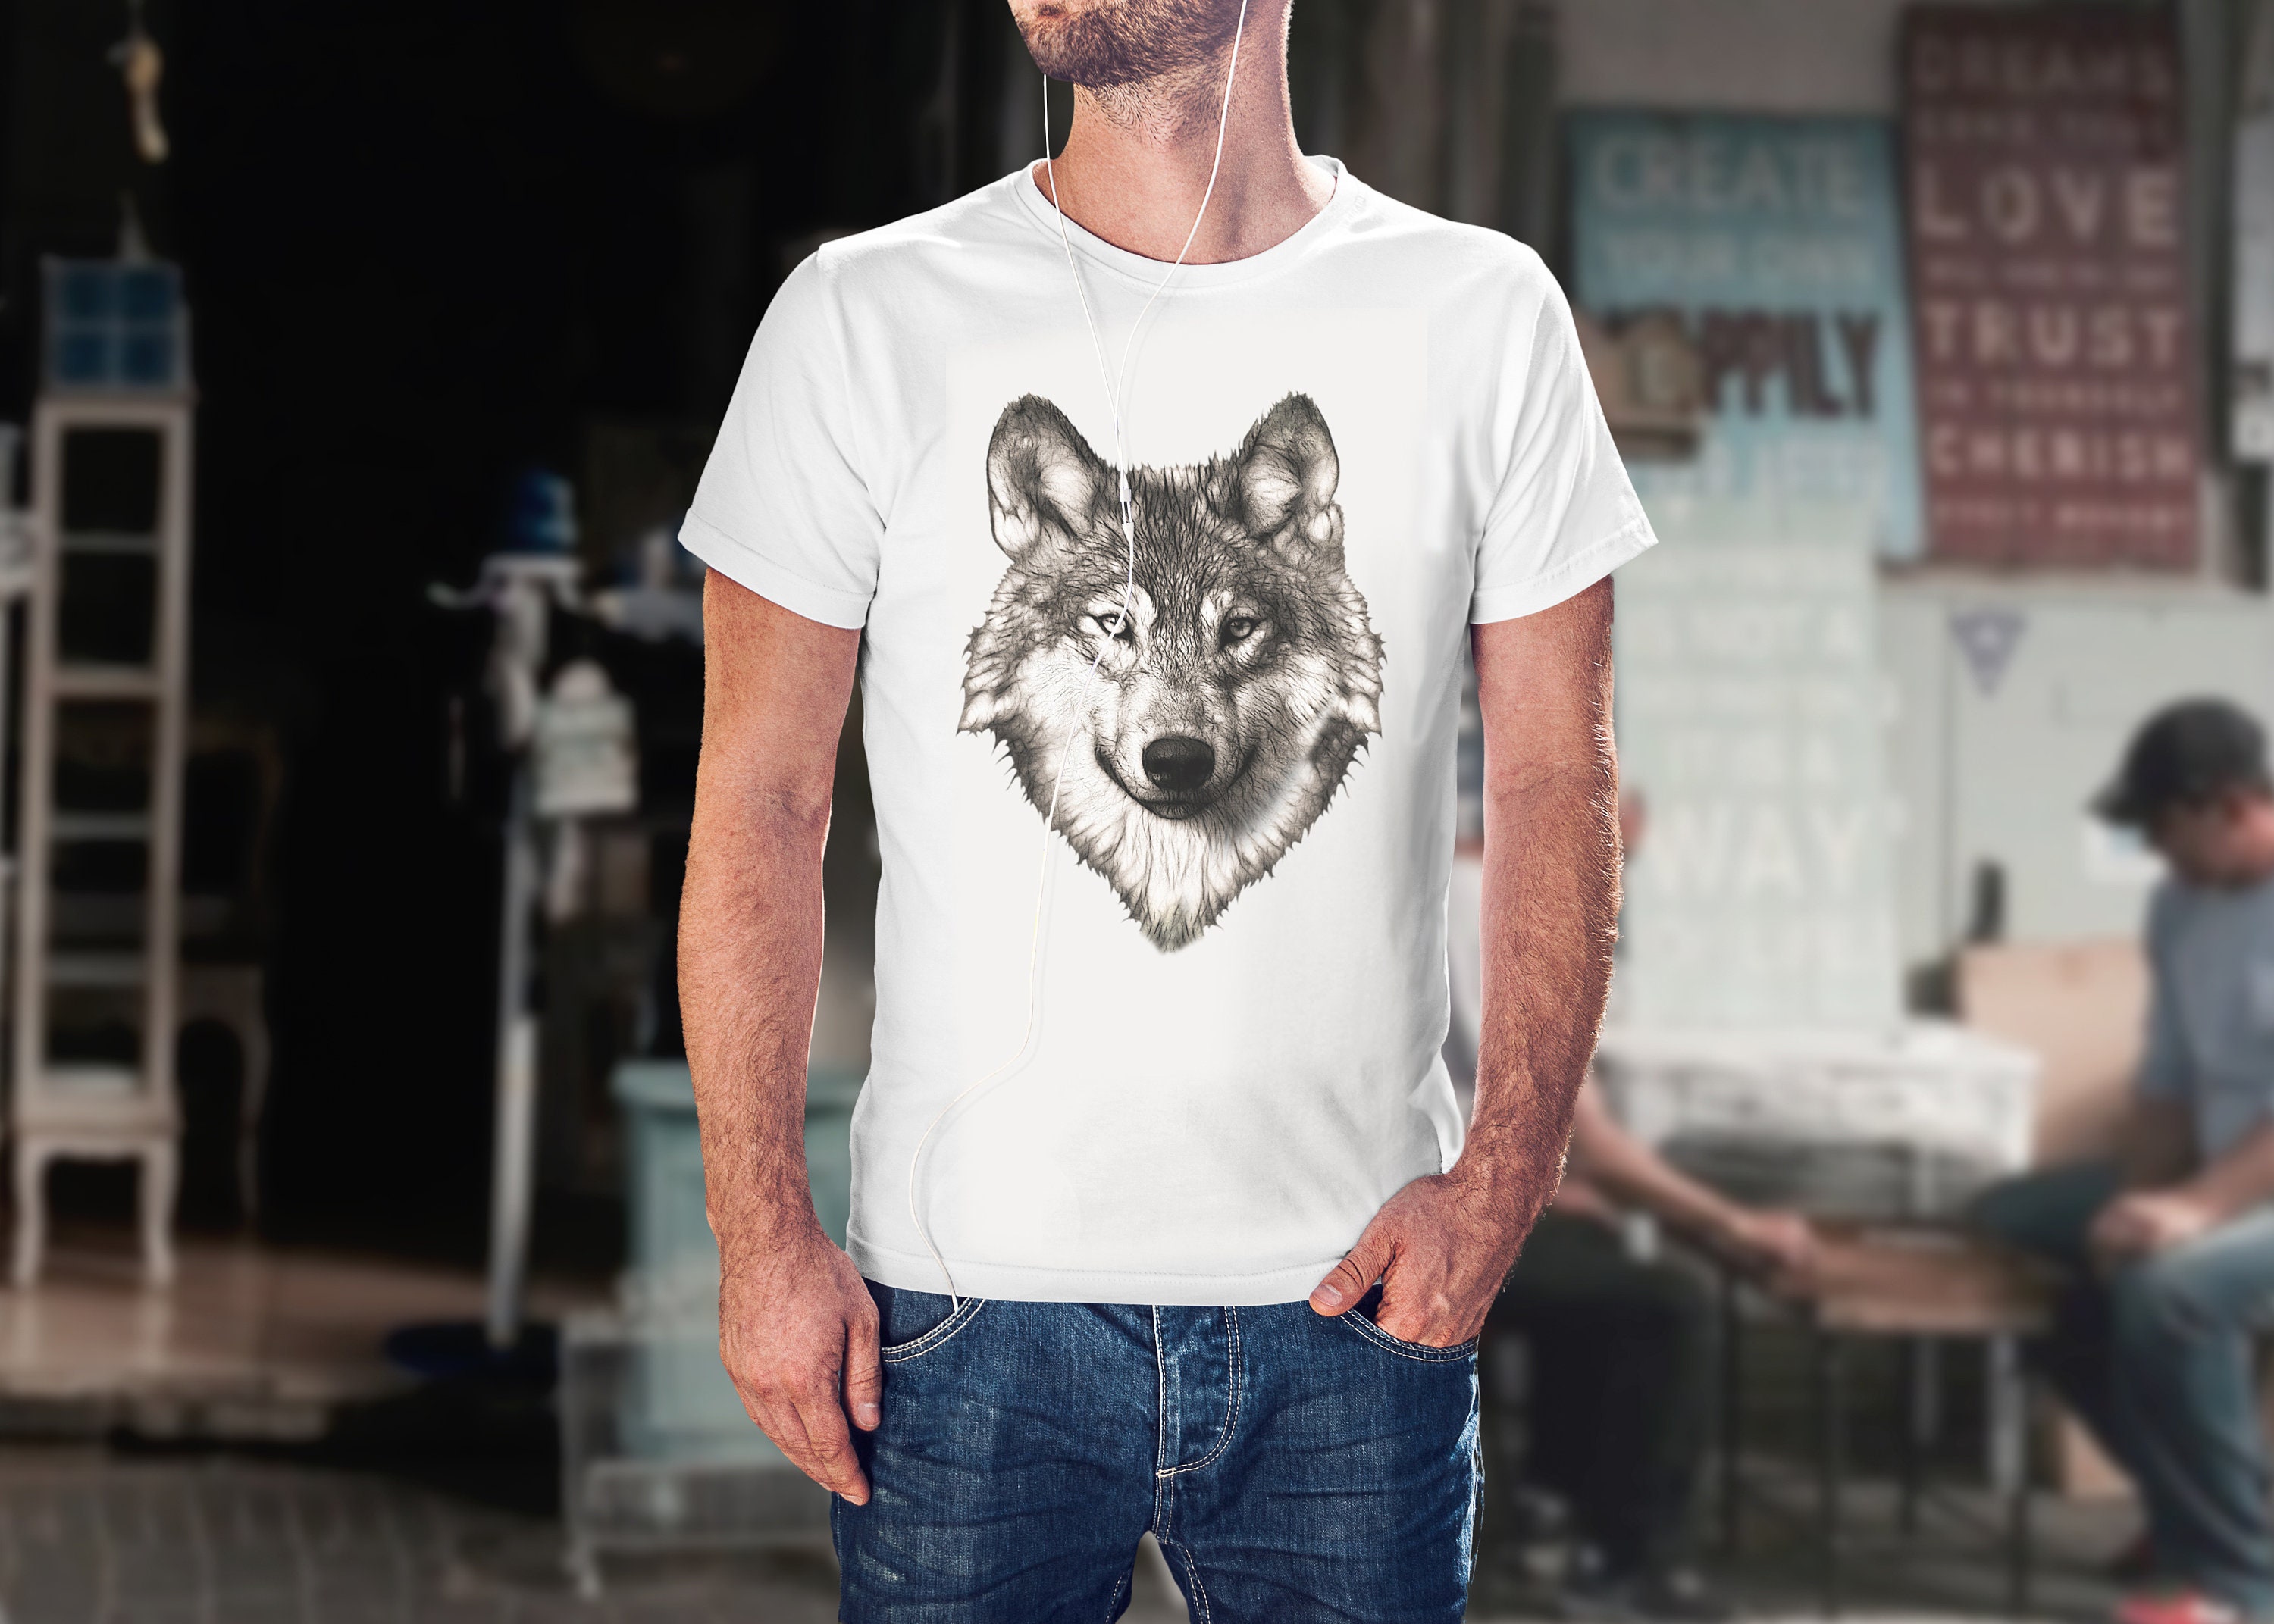 Stunning WOLF Head T-shirt. Feel the Power When You Wear This - Etsy